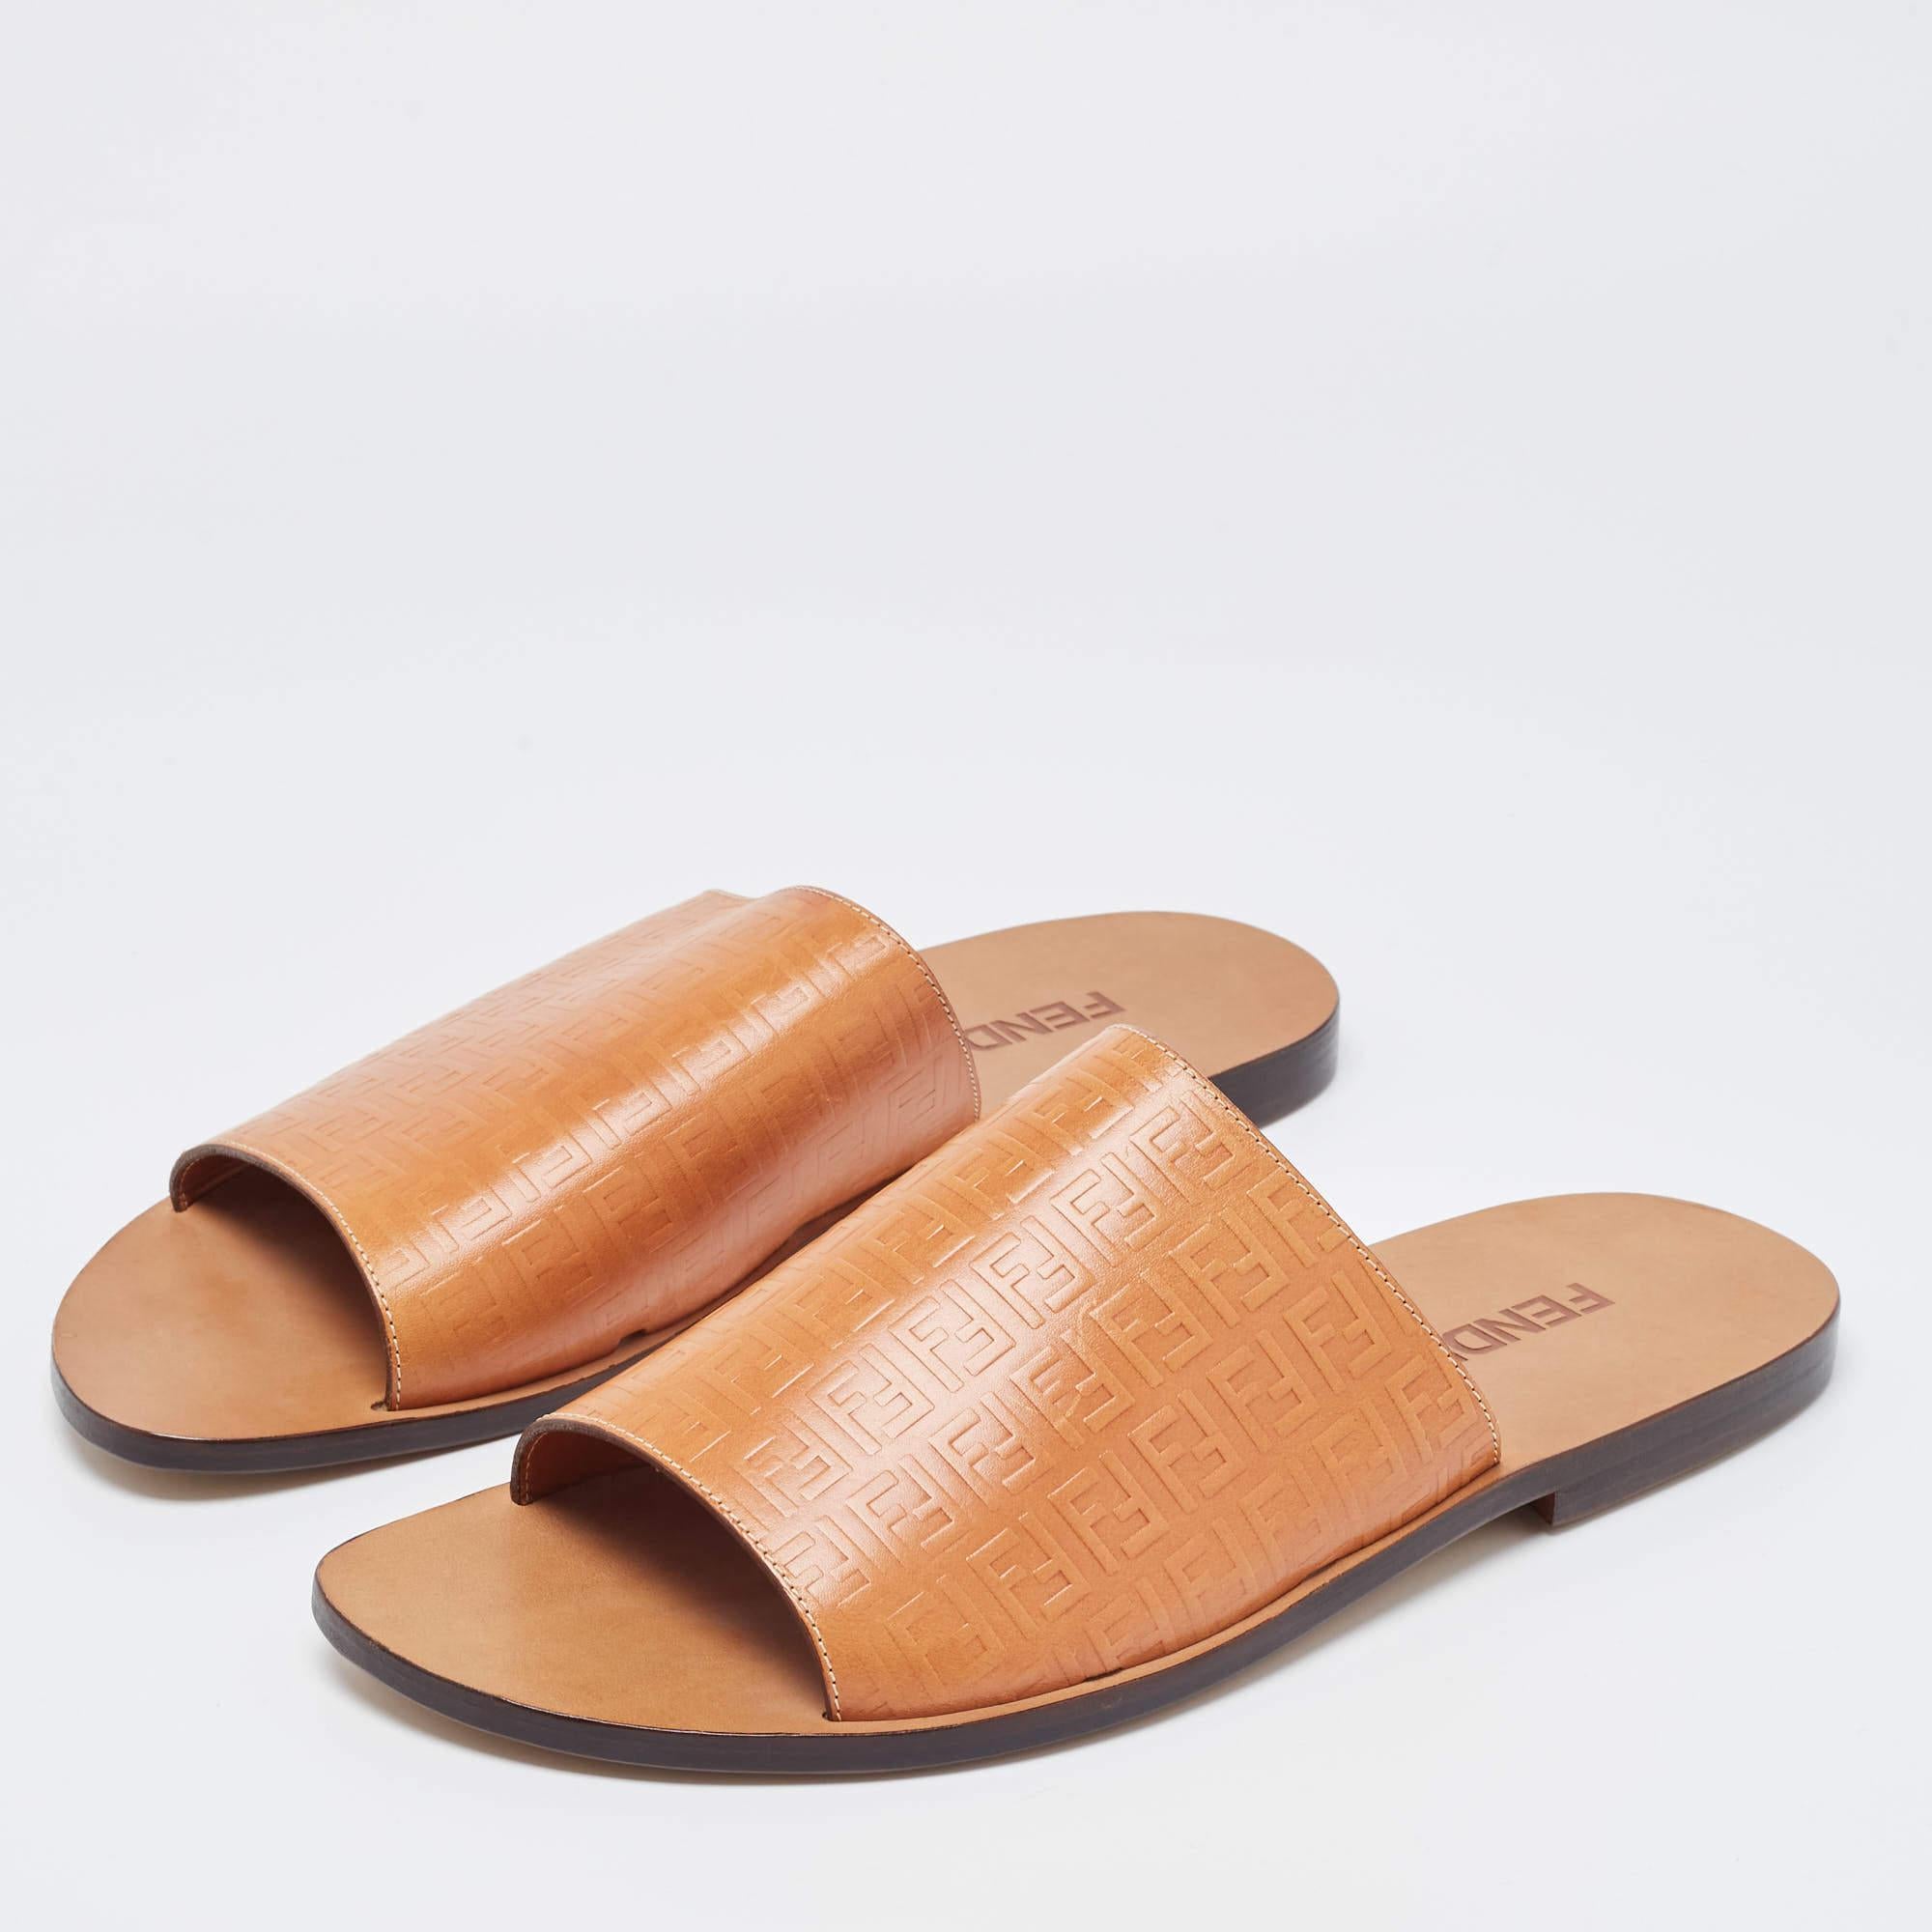 Fendi Tan Zucca Embossed Leather Slides Size 45 1